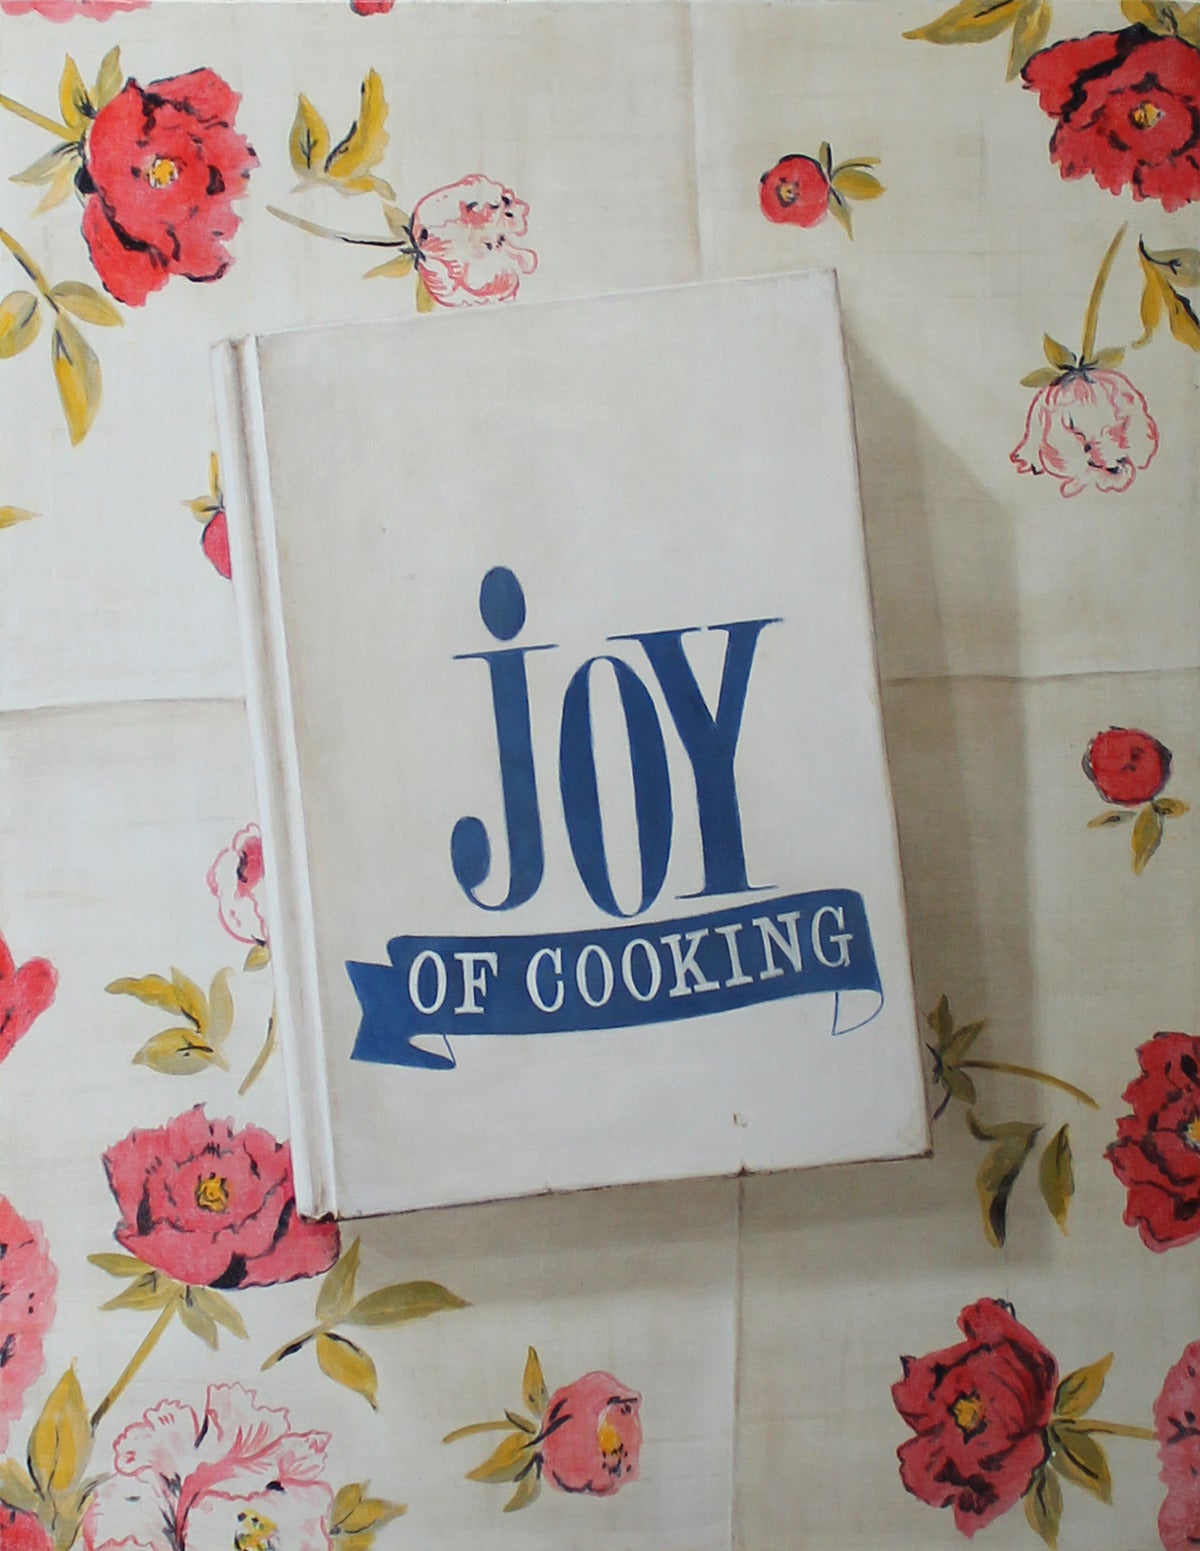 Joy of Cooking - Painting by Holly Farrell